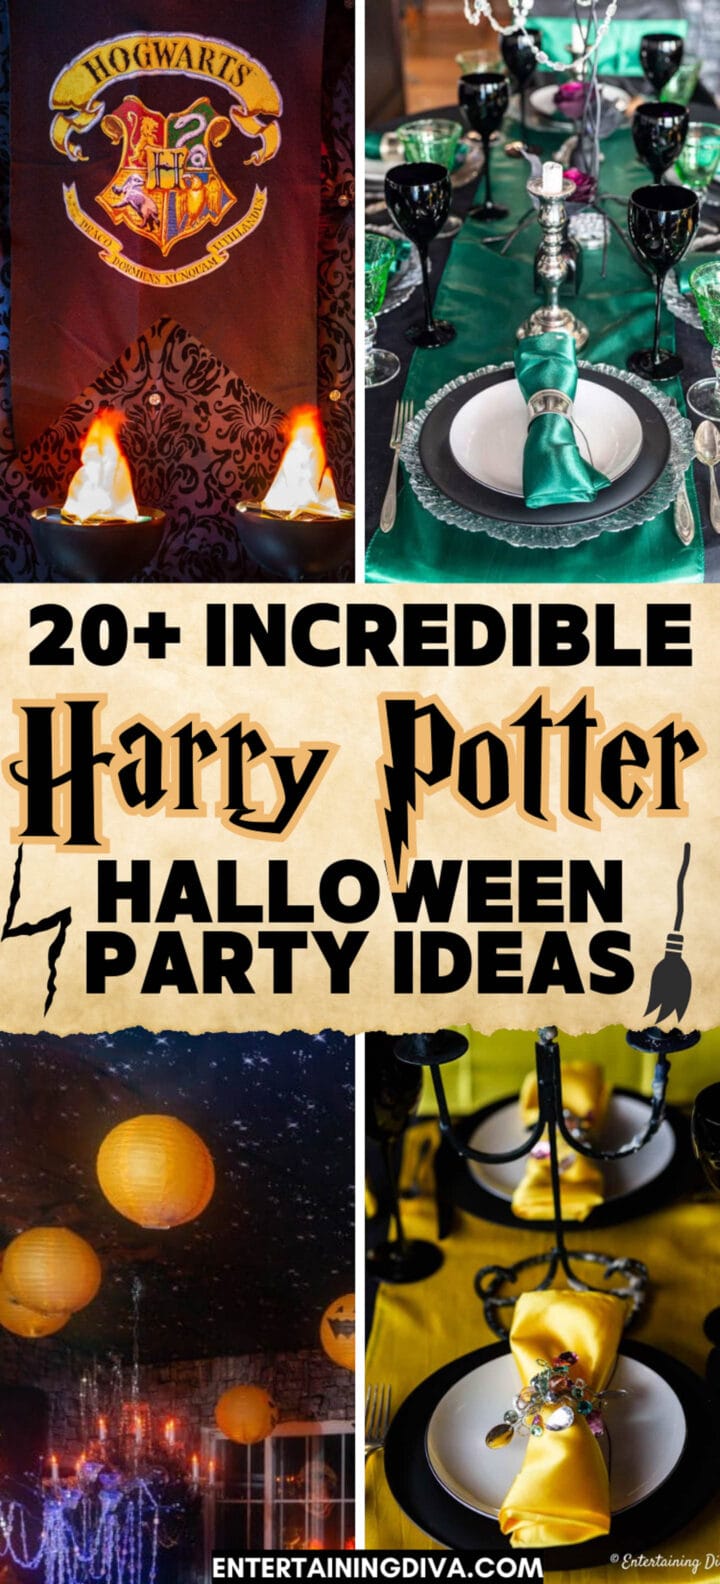 20 incredible Harry Potter Halloween party ideas.